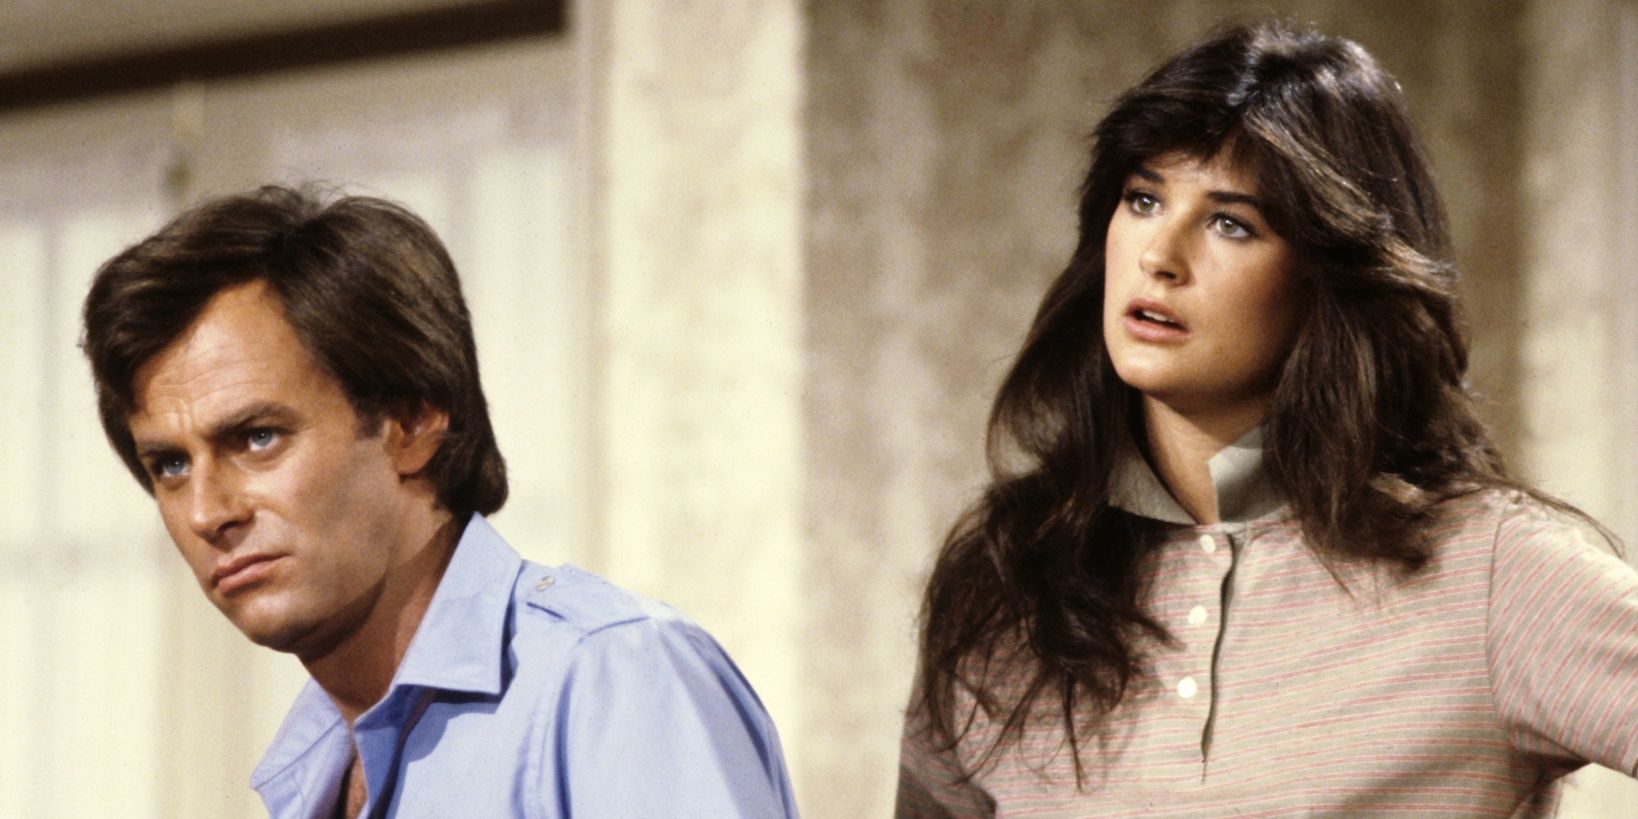 10 Famous Actors Who Got Their Start On Soap Operas